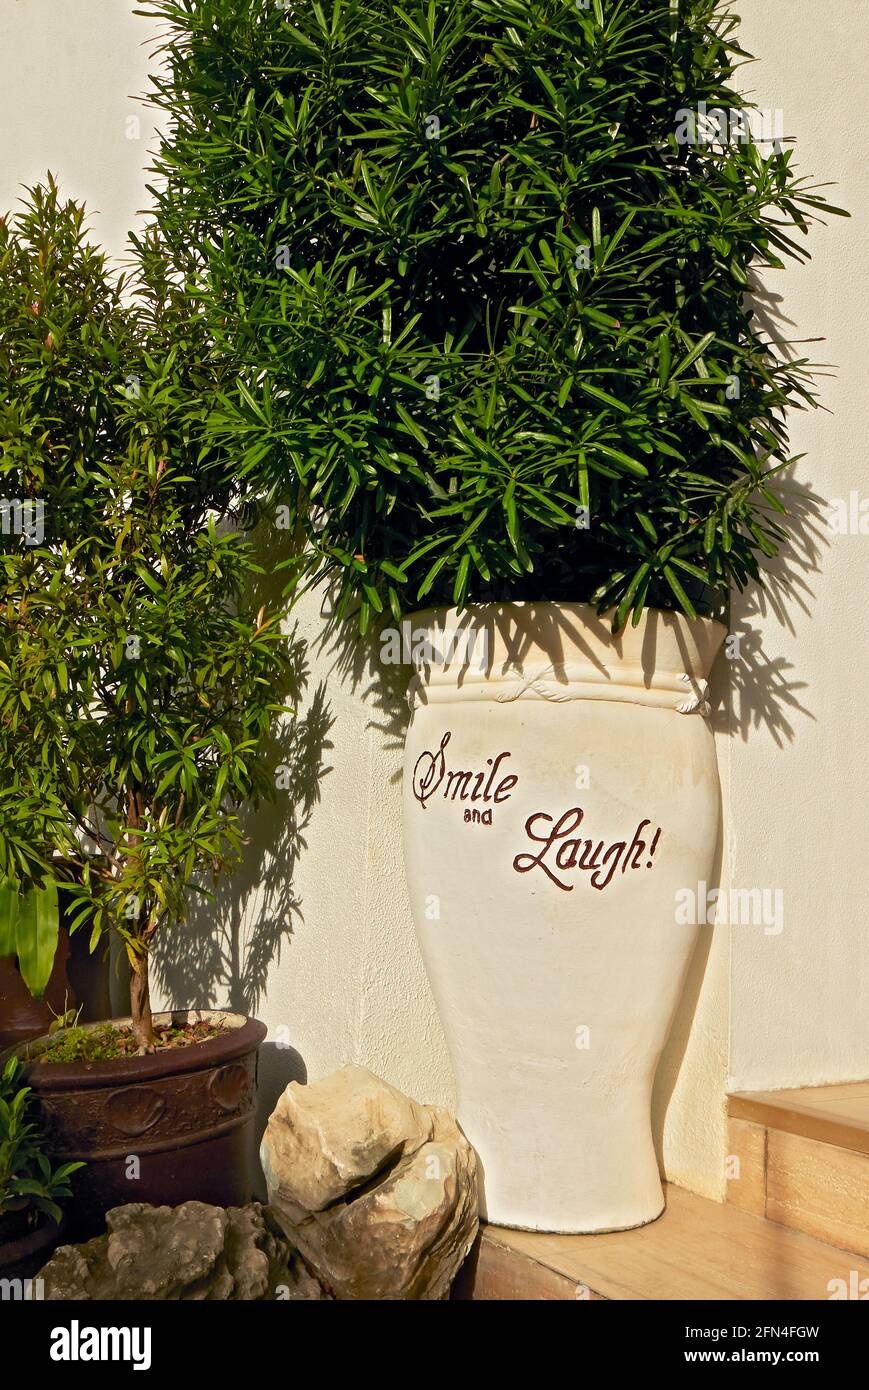 Smile and laugh! written on a clay vase, filled with green plants nicely arranged at an outdoor entrance of a home in warm summer light ambient Stock Photo